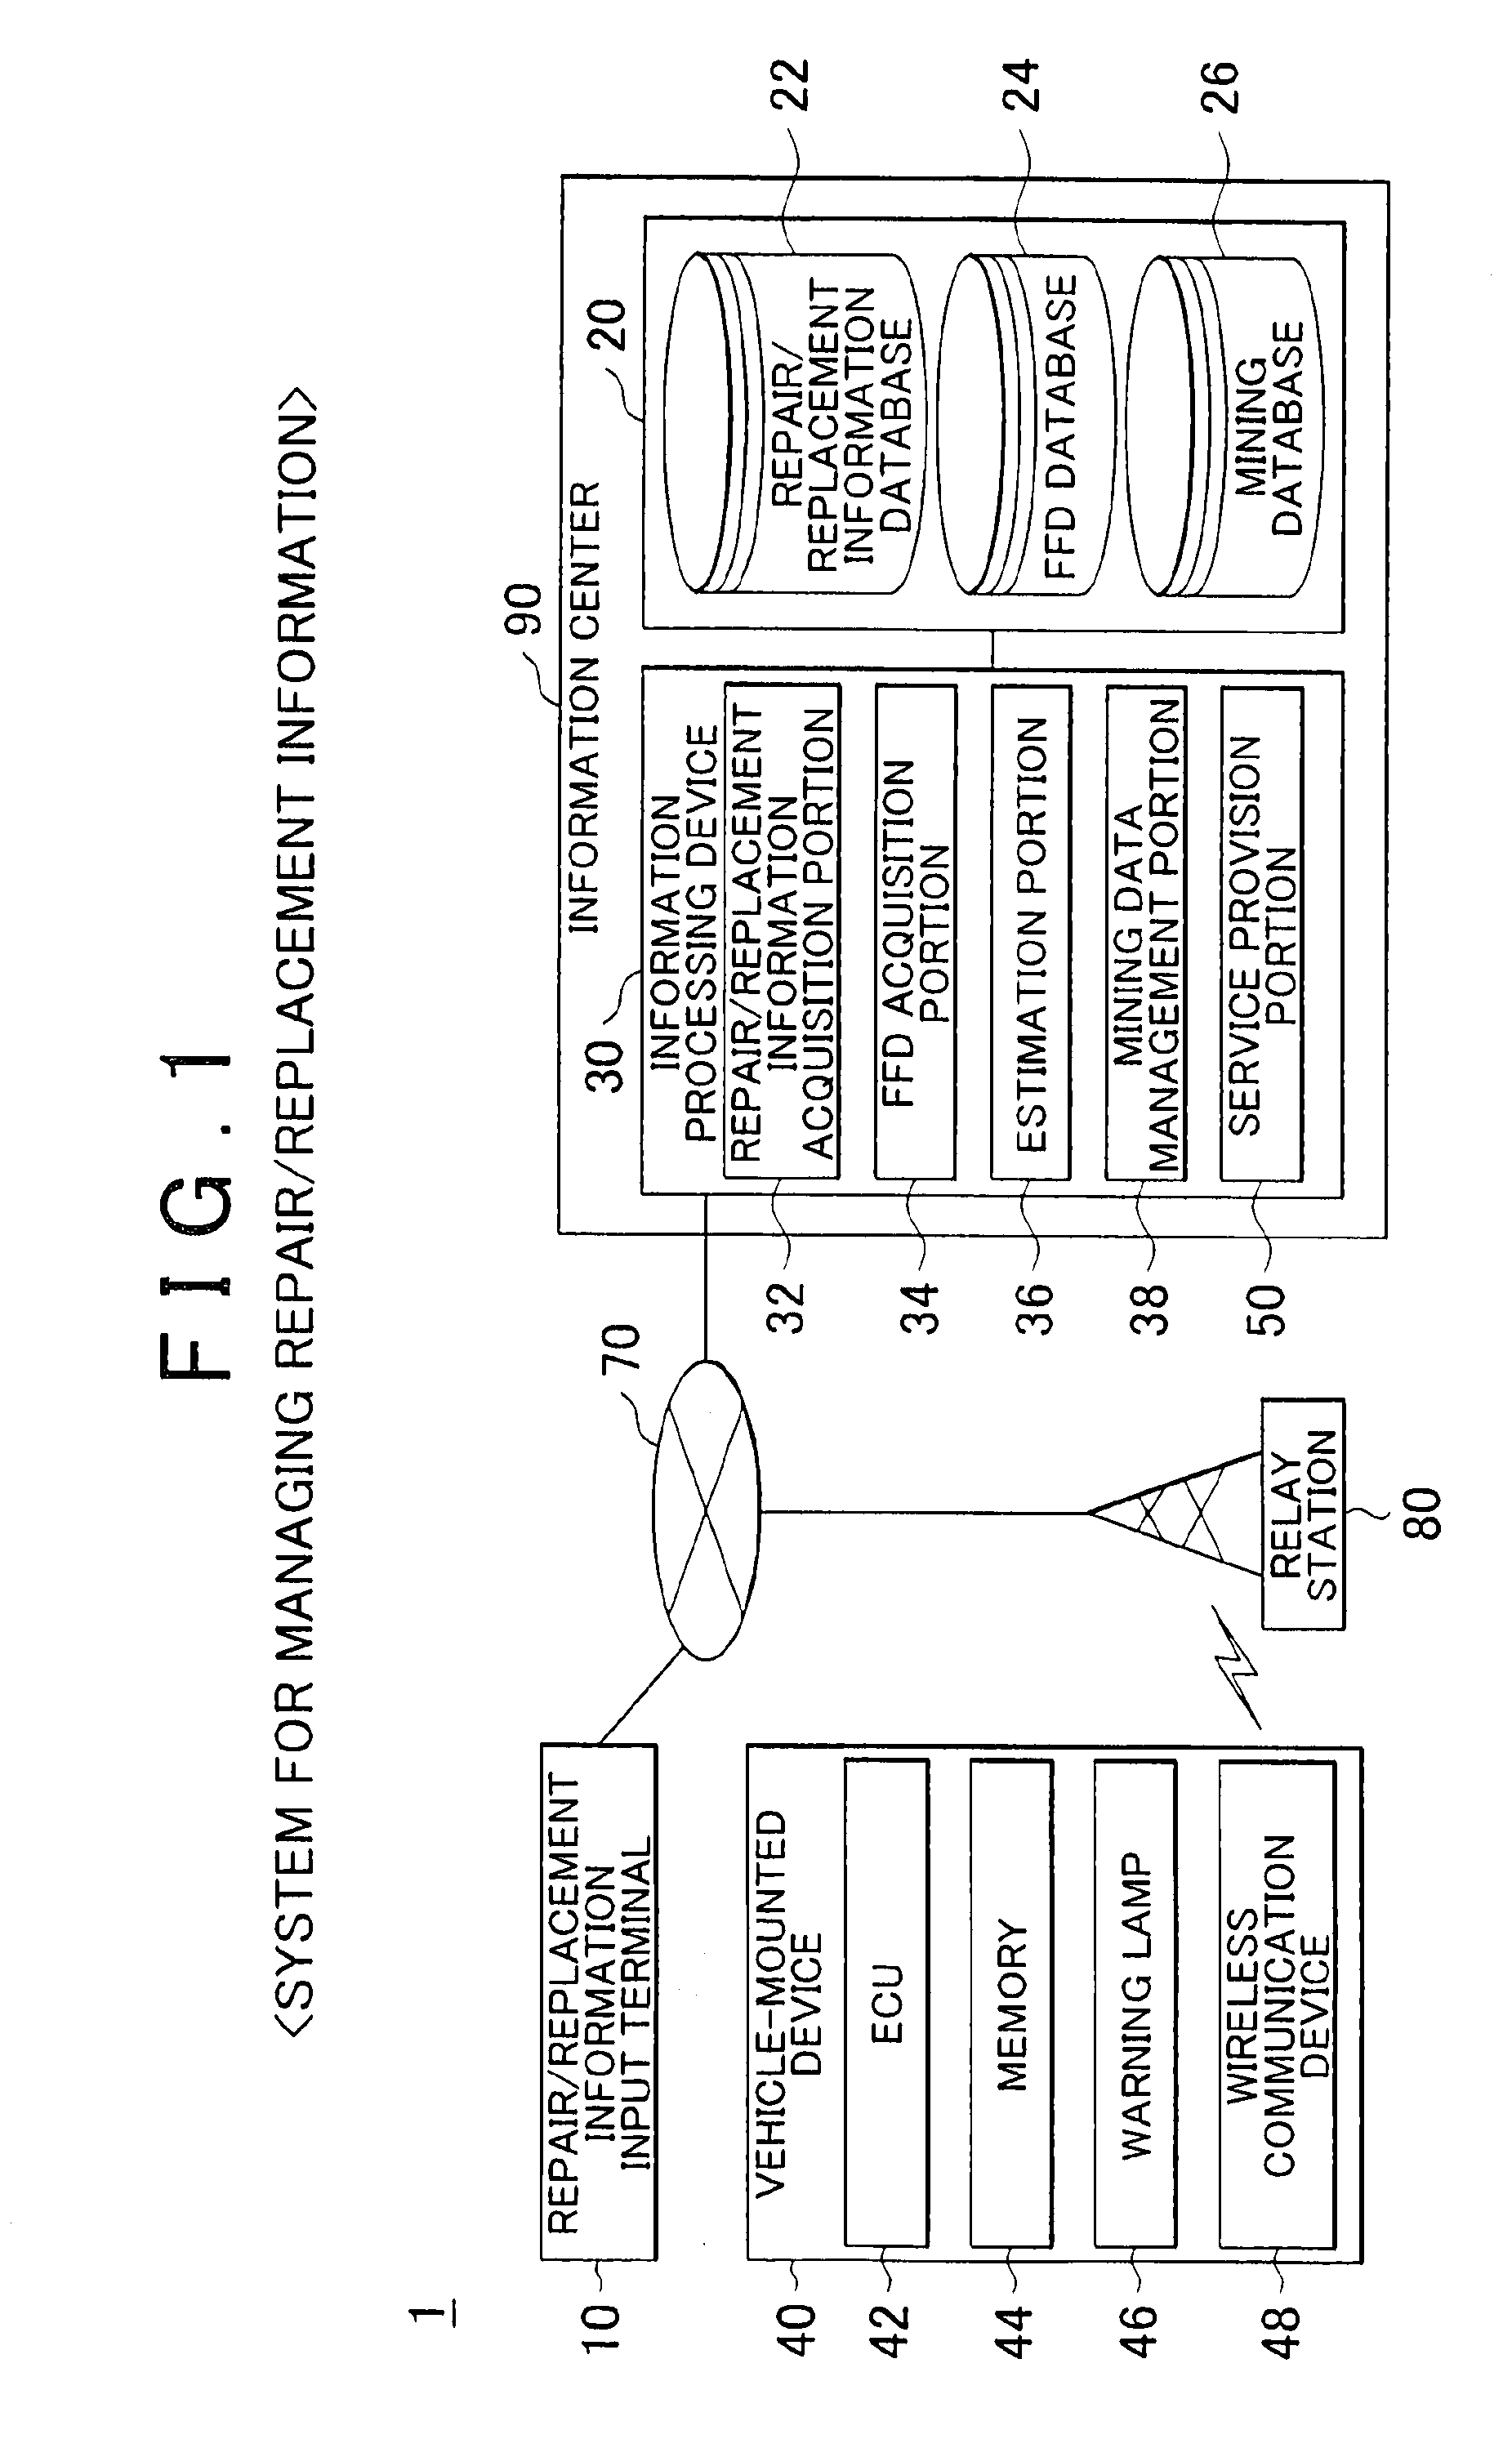 Vehicle repair/replacement information management system, and vehicle abnormality cause information management system